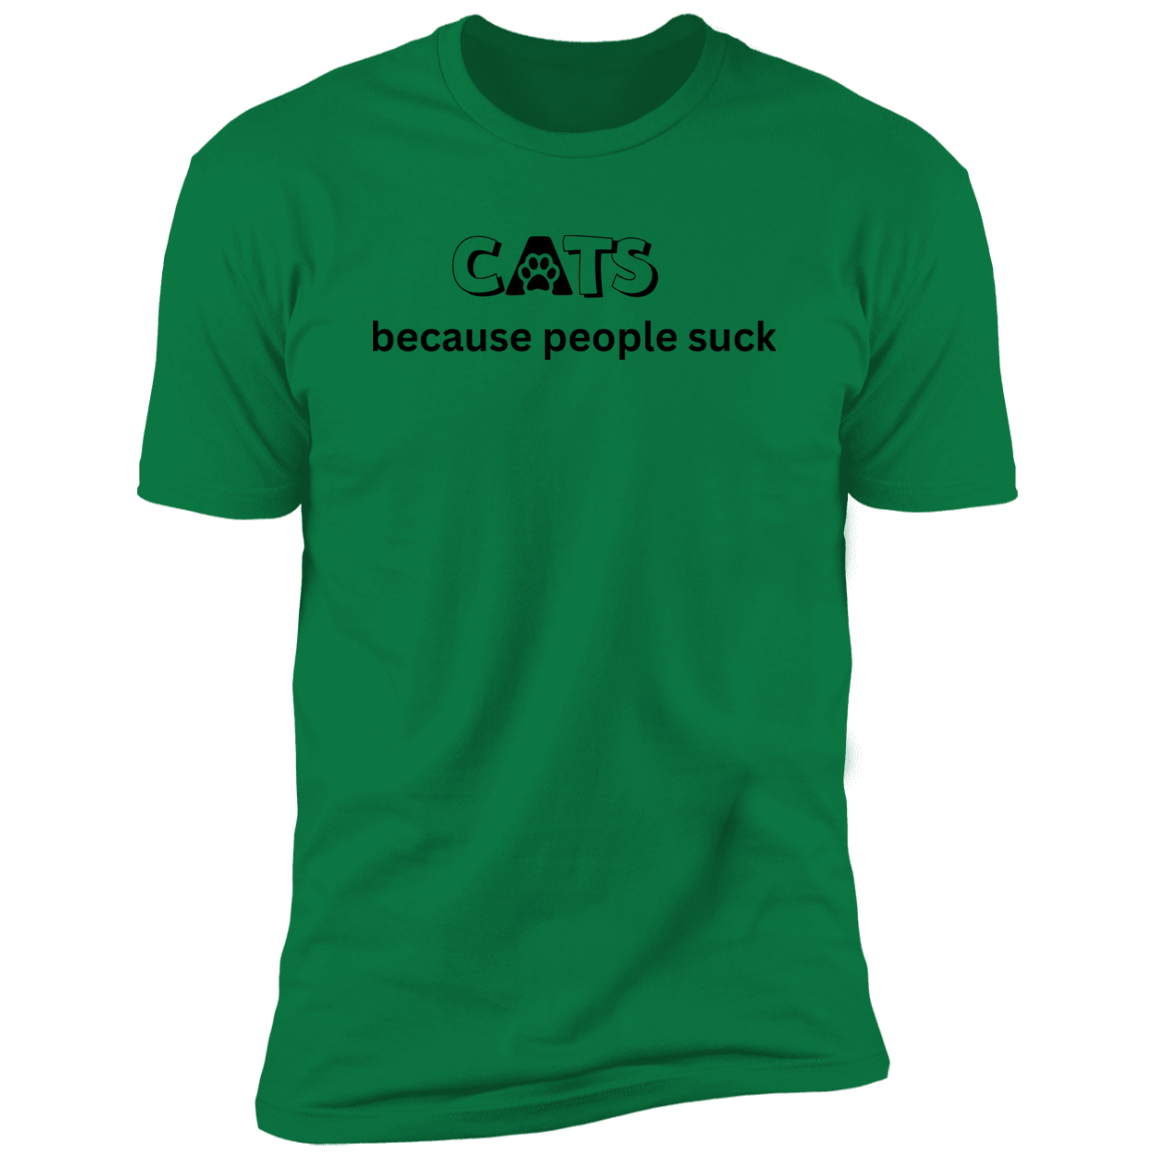 Cats Because People Suck T-shirt, Cat Shirt for humans, in kelly green